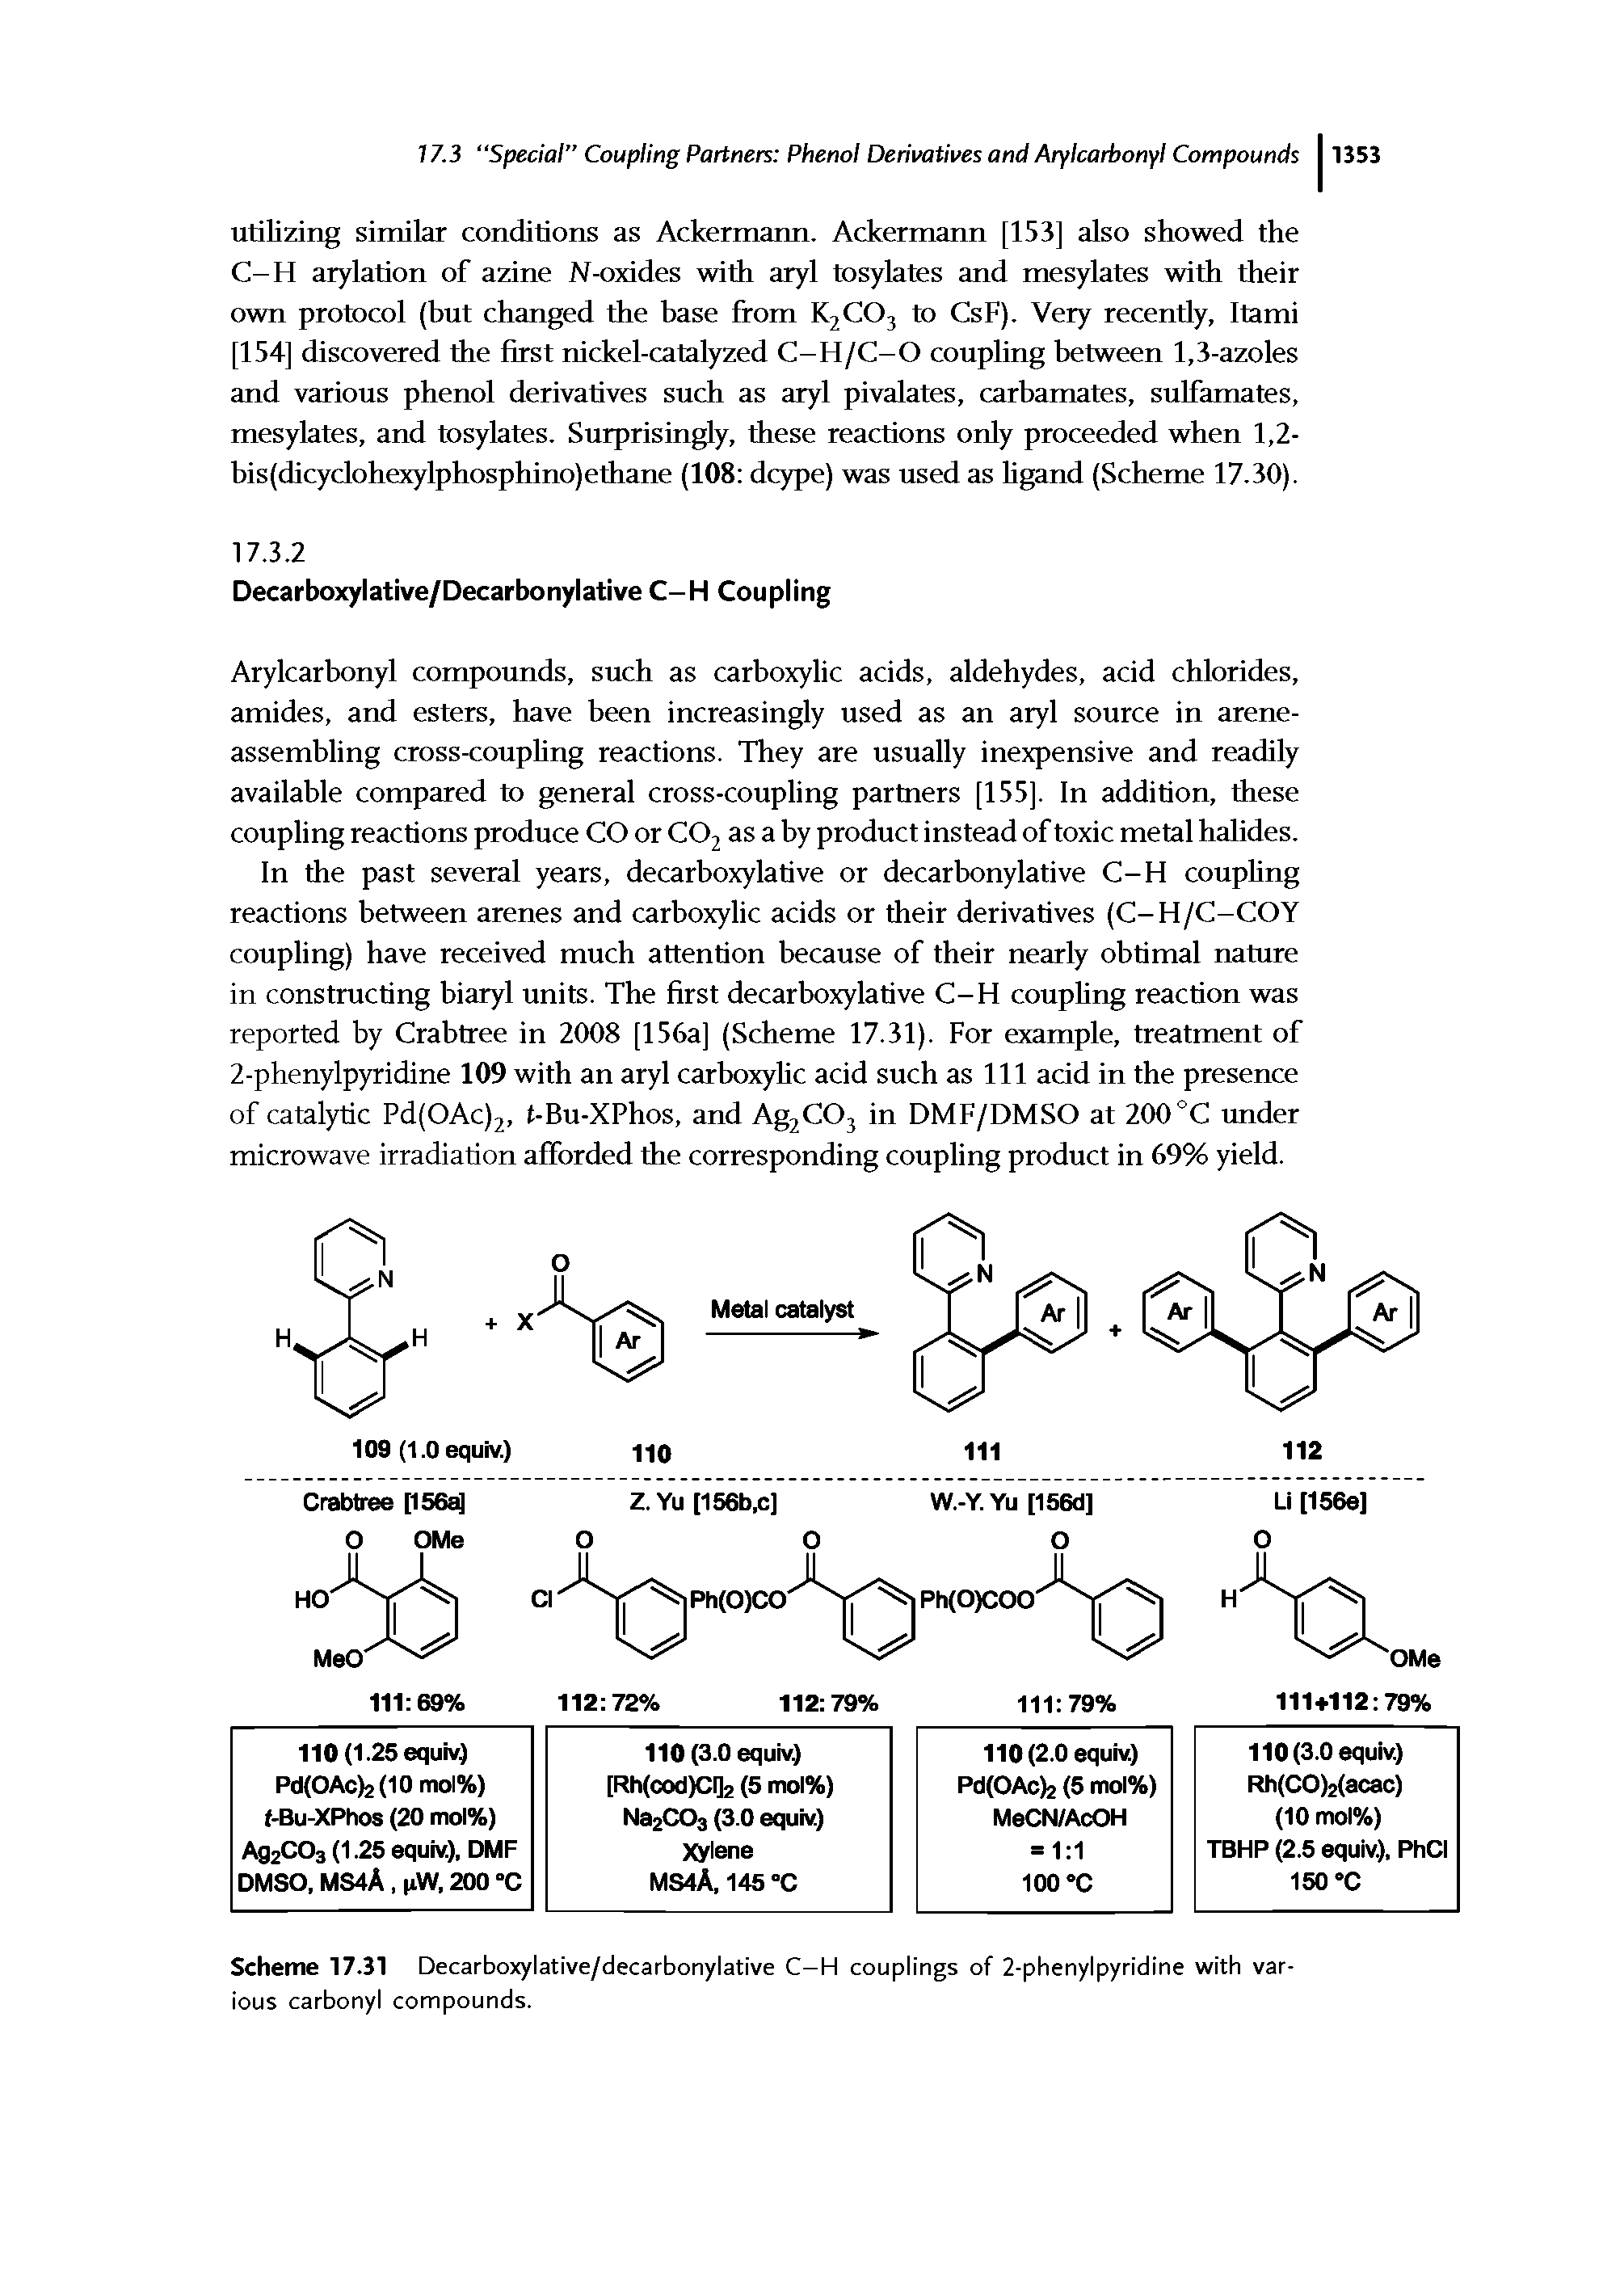 Scheme 17.31 Decarboxylative/decarbonylative C-H couplings of 2-phenylpyridine with various carbonyl compounds.